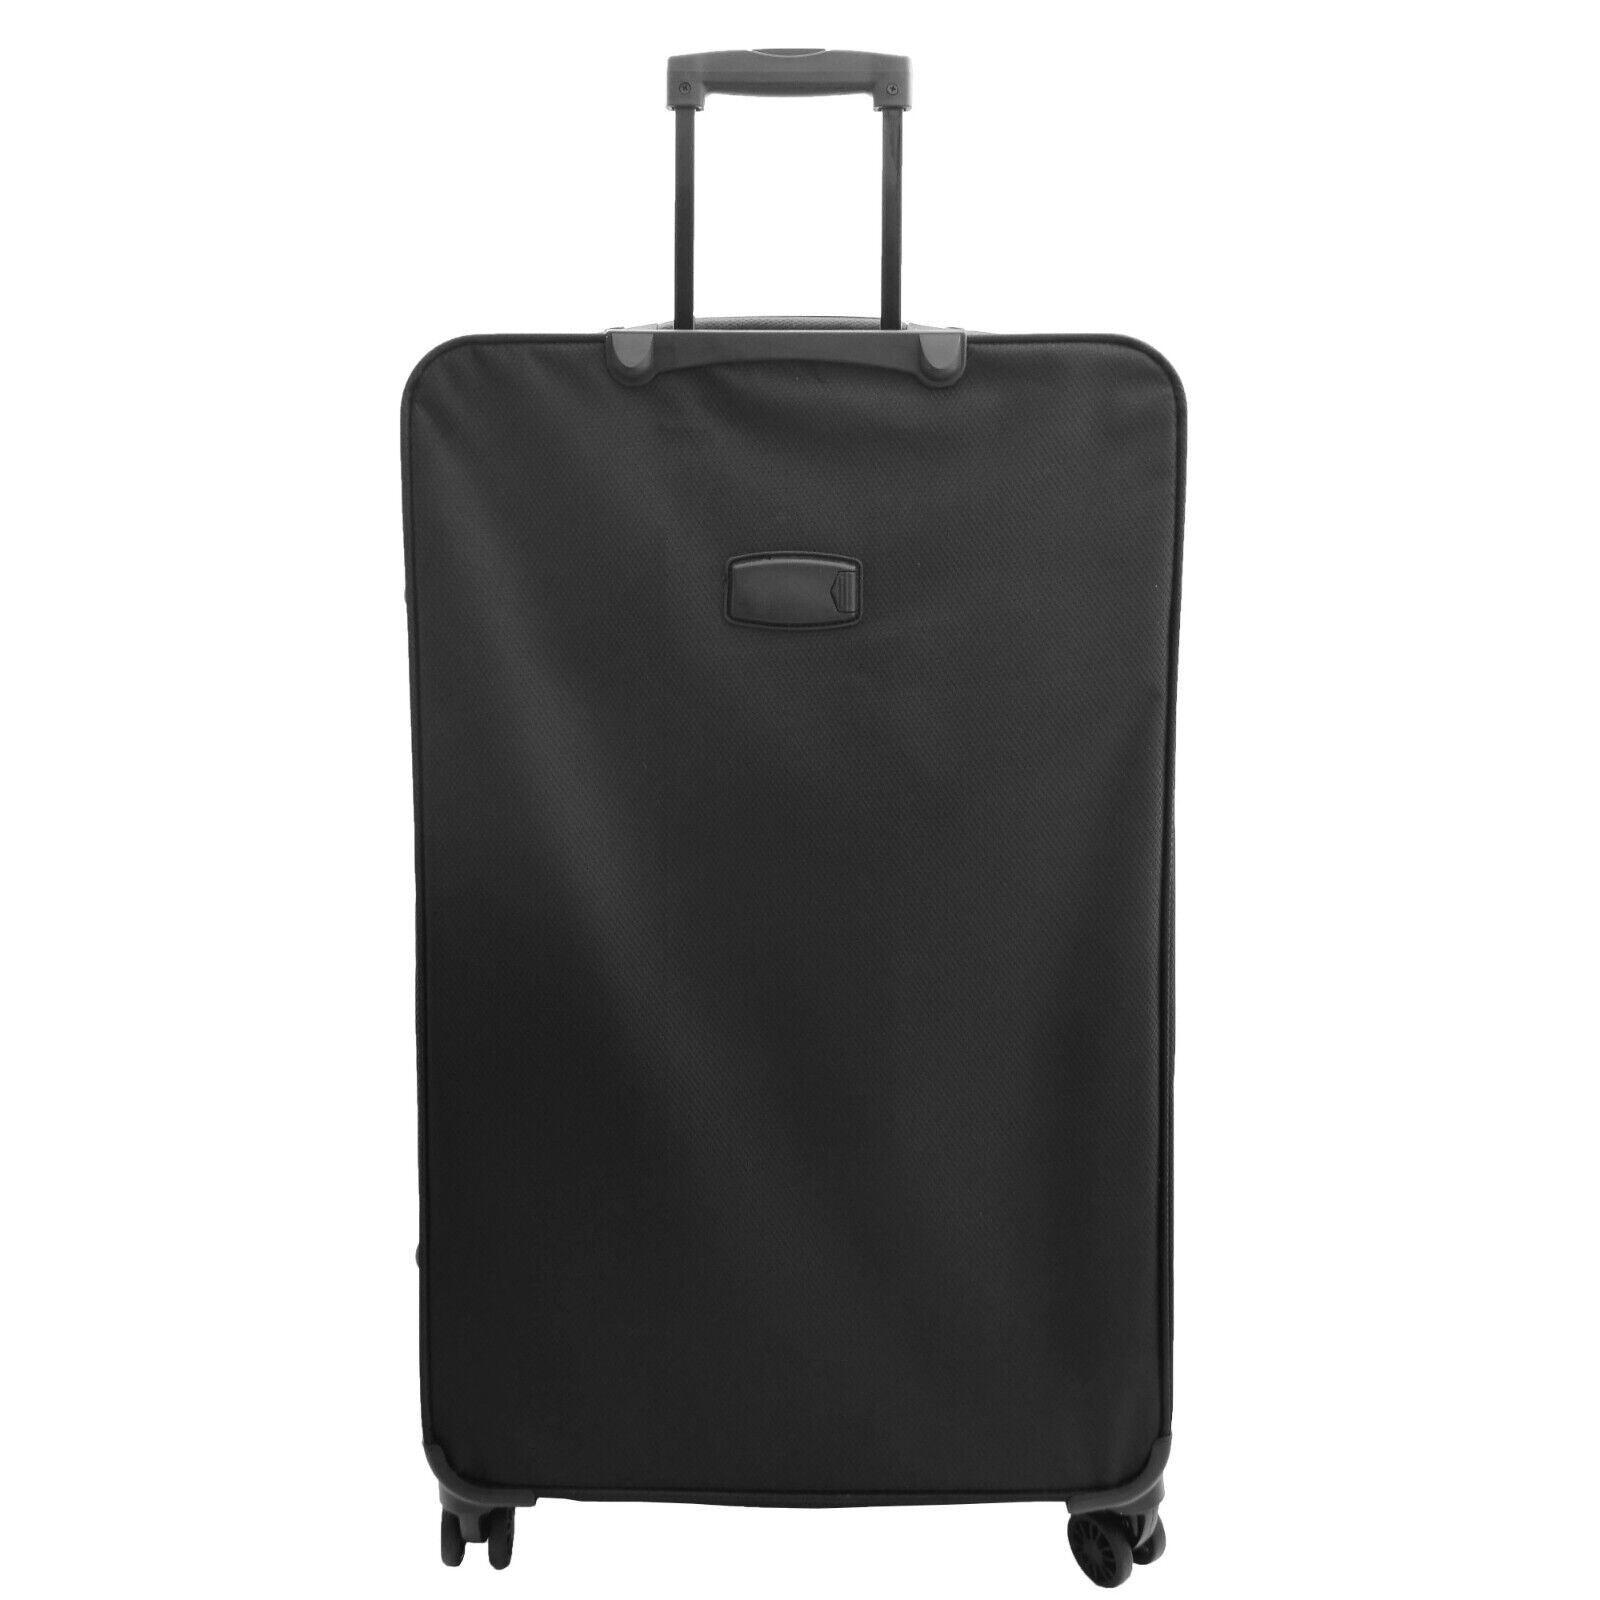 Calera Large Soft Shell Suitcase in Black